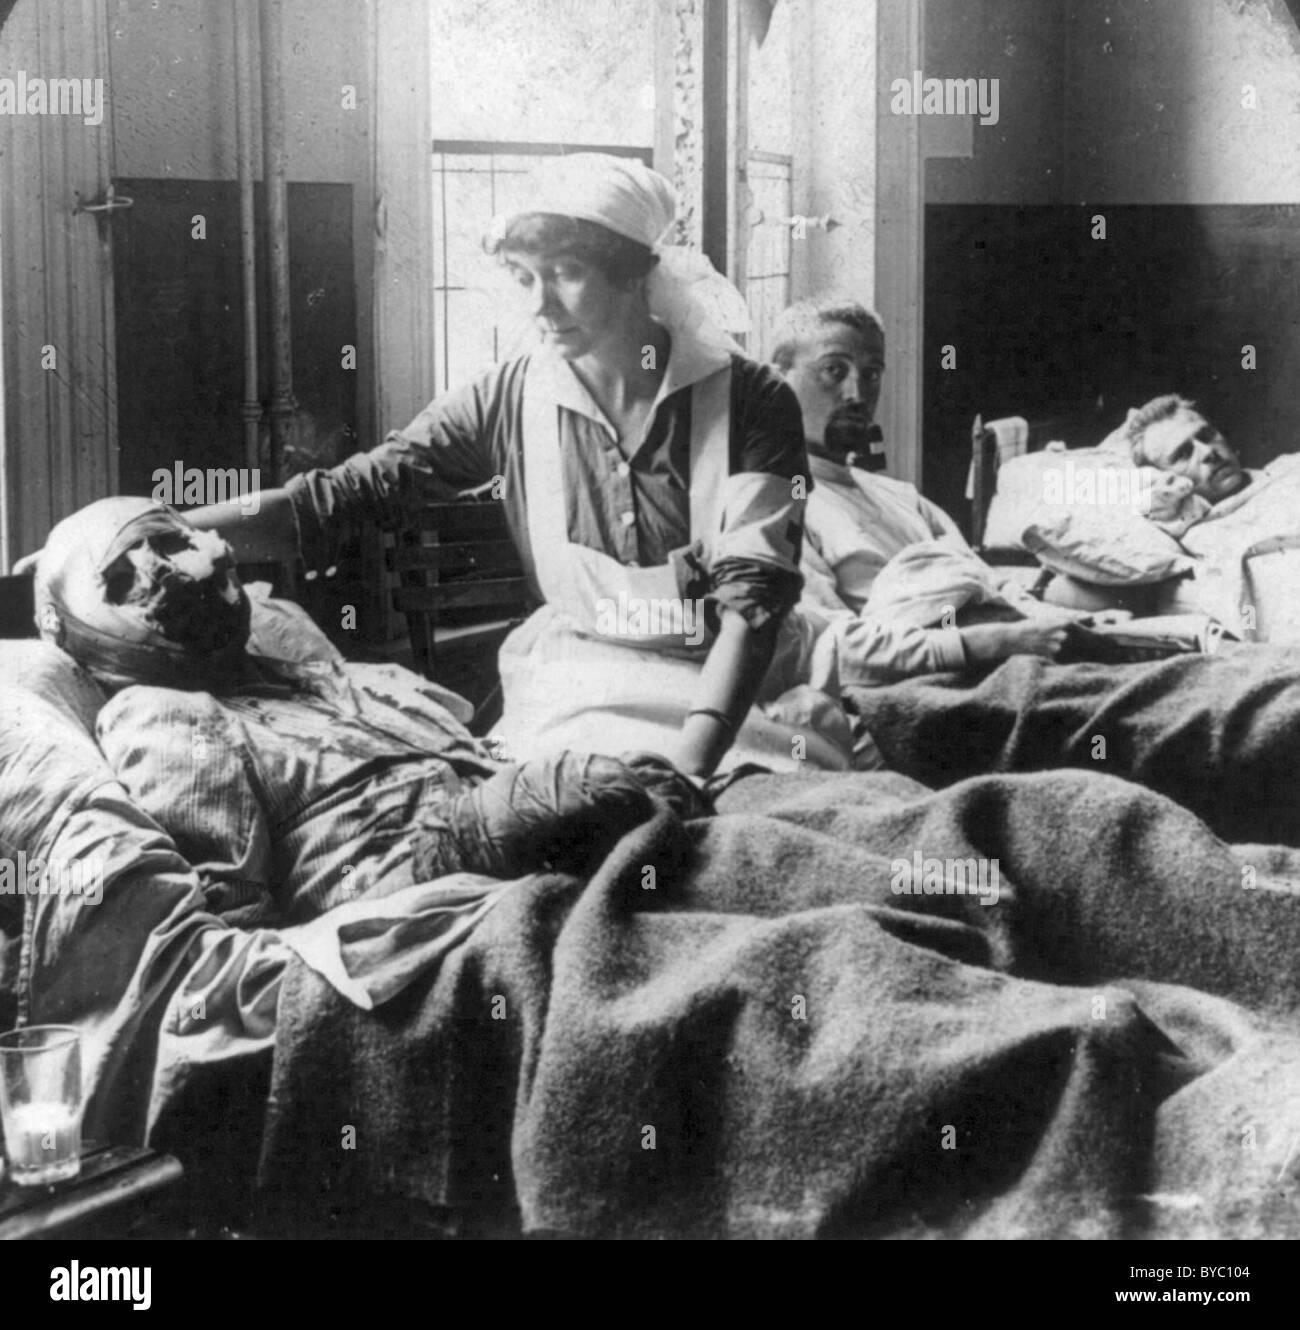 WWI photos show realities of injured soldiers in hospital